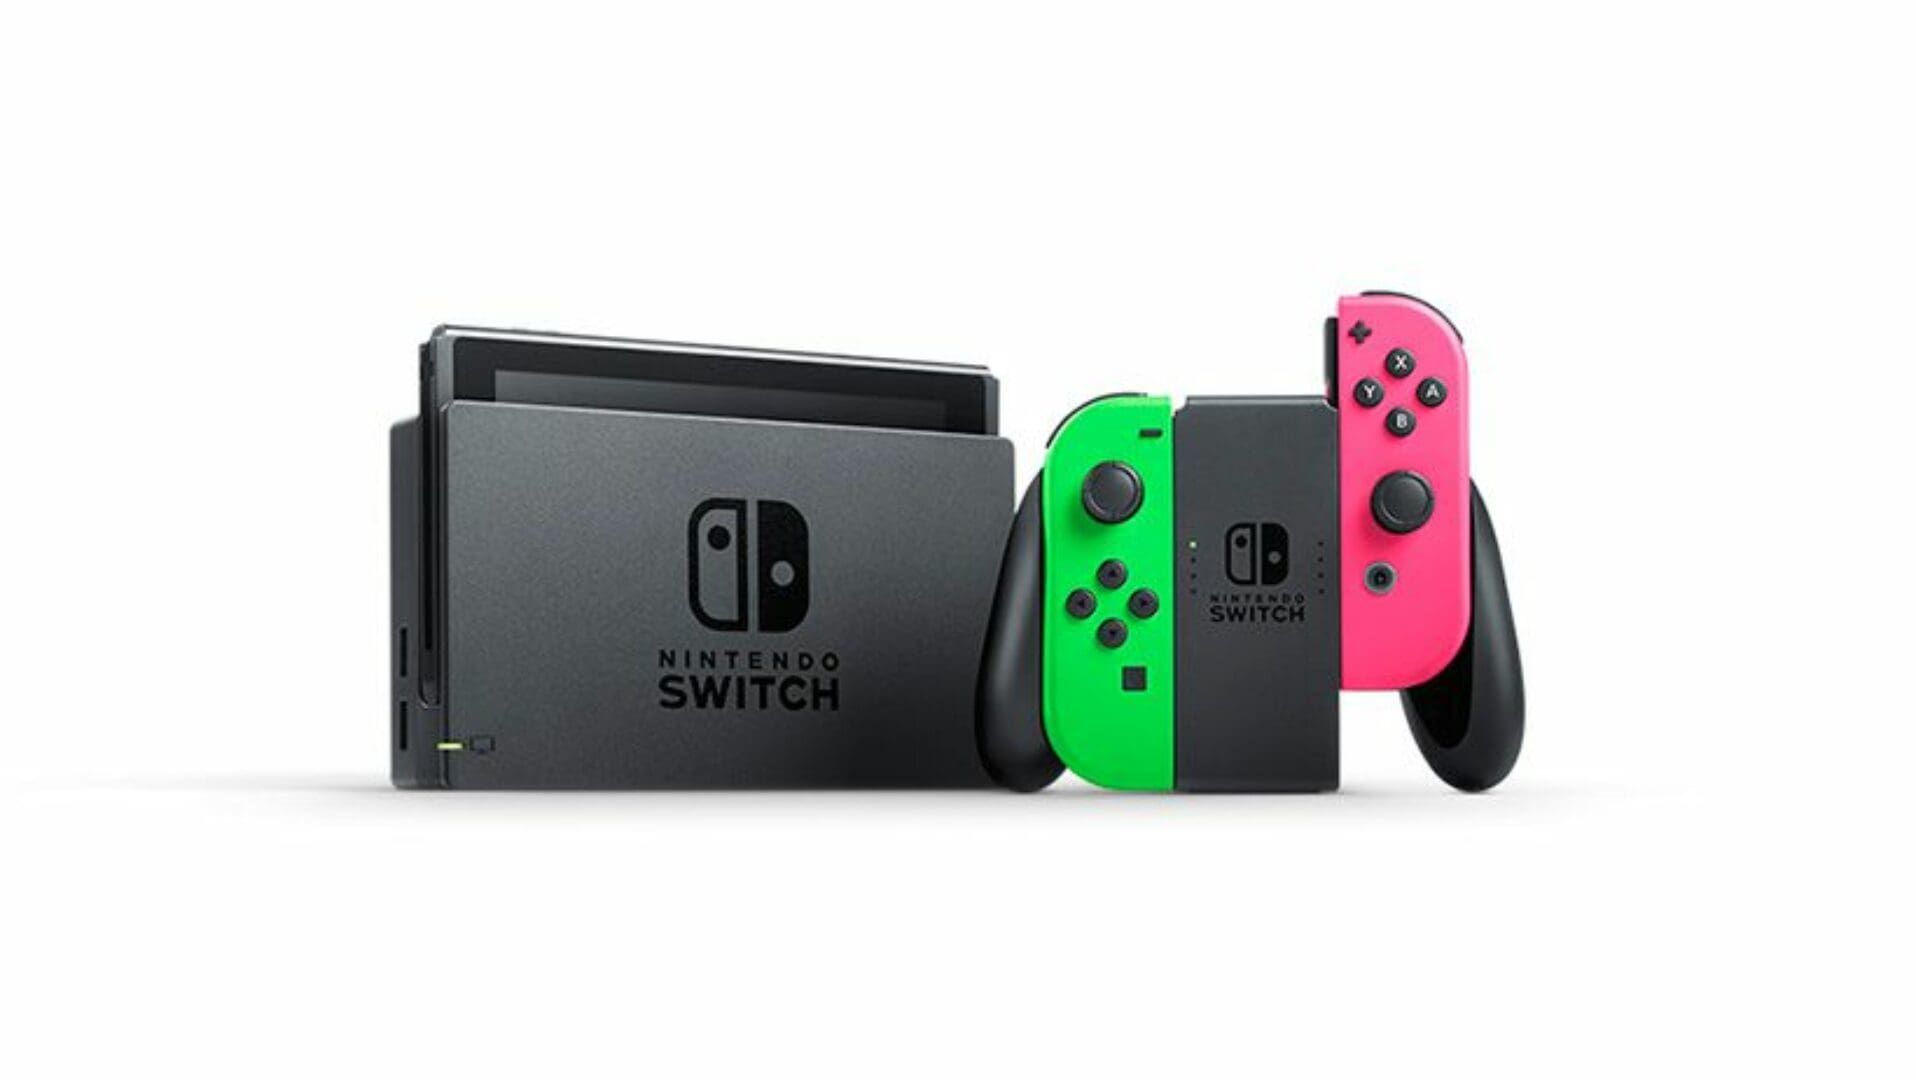 Splatoon 2 Switch Accessories Now Available!